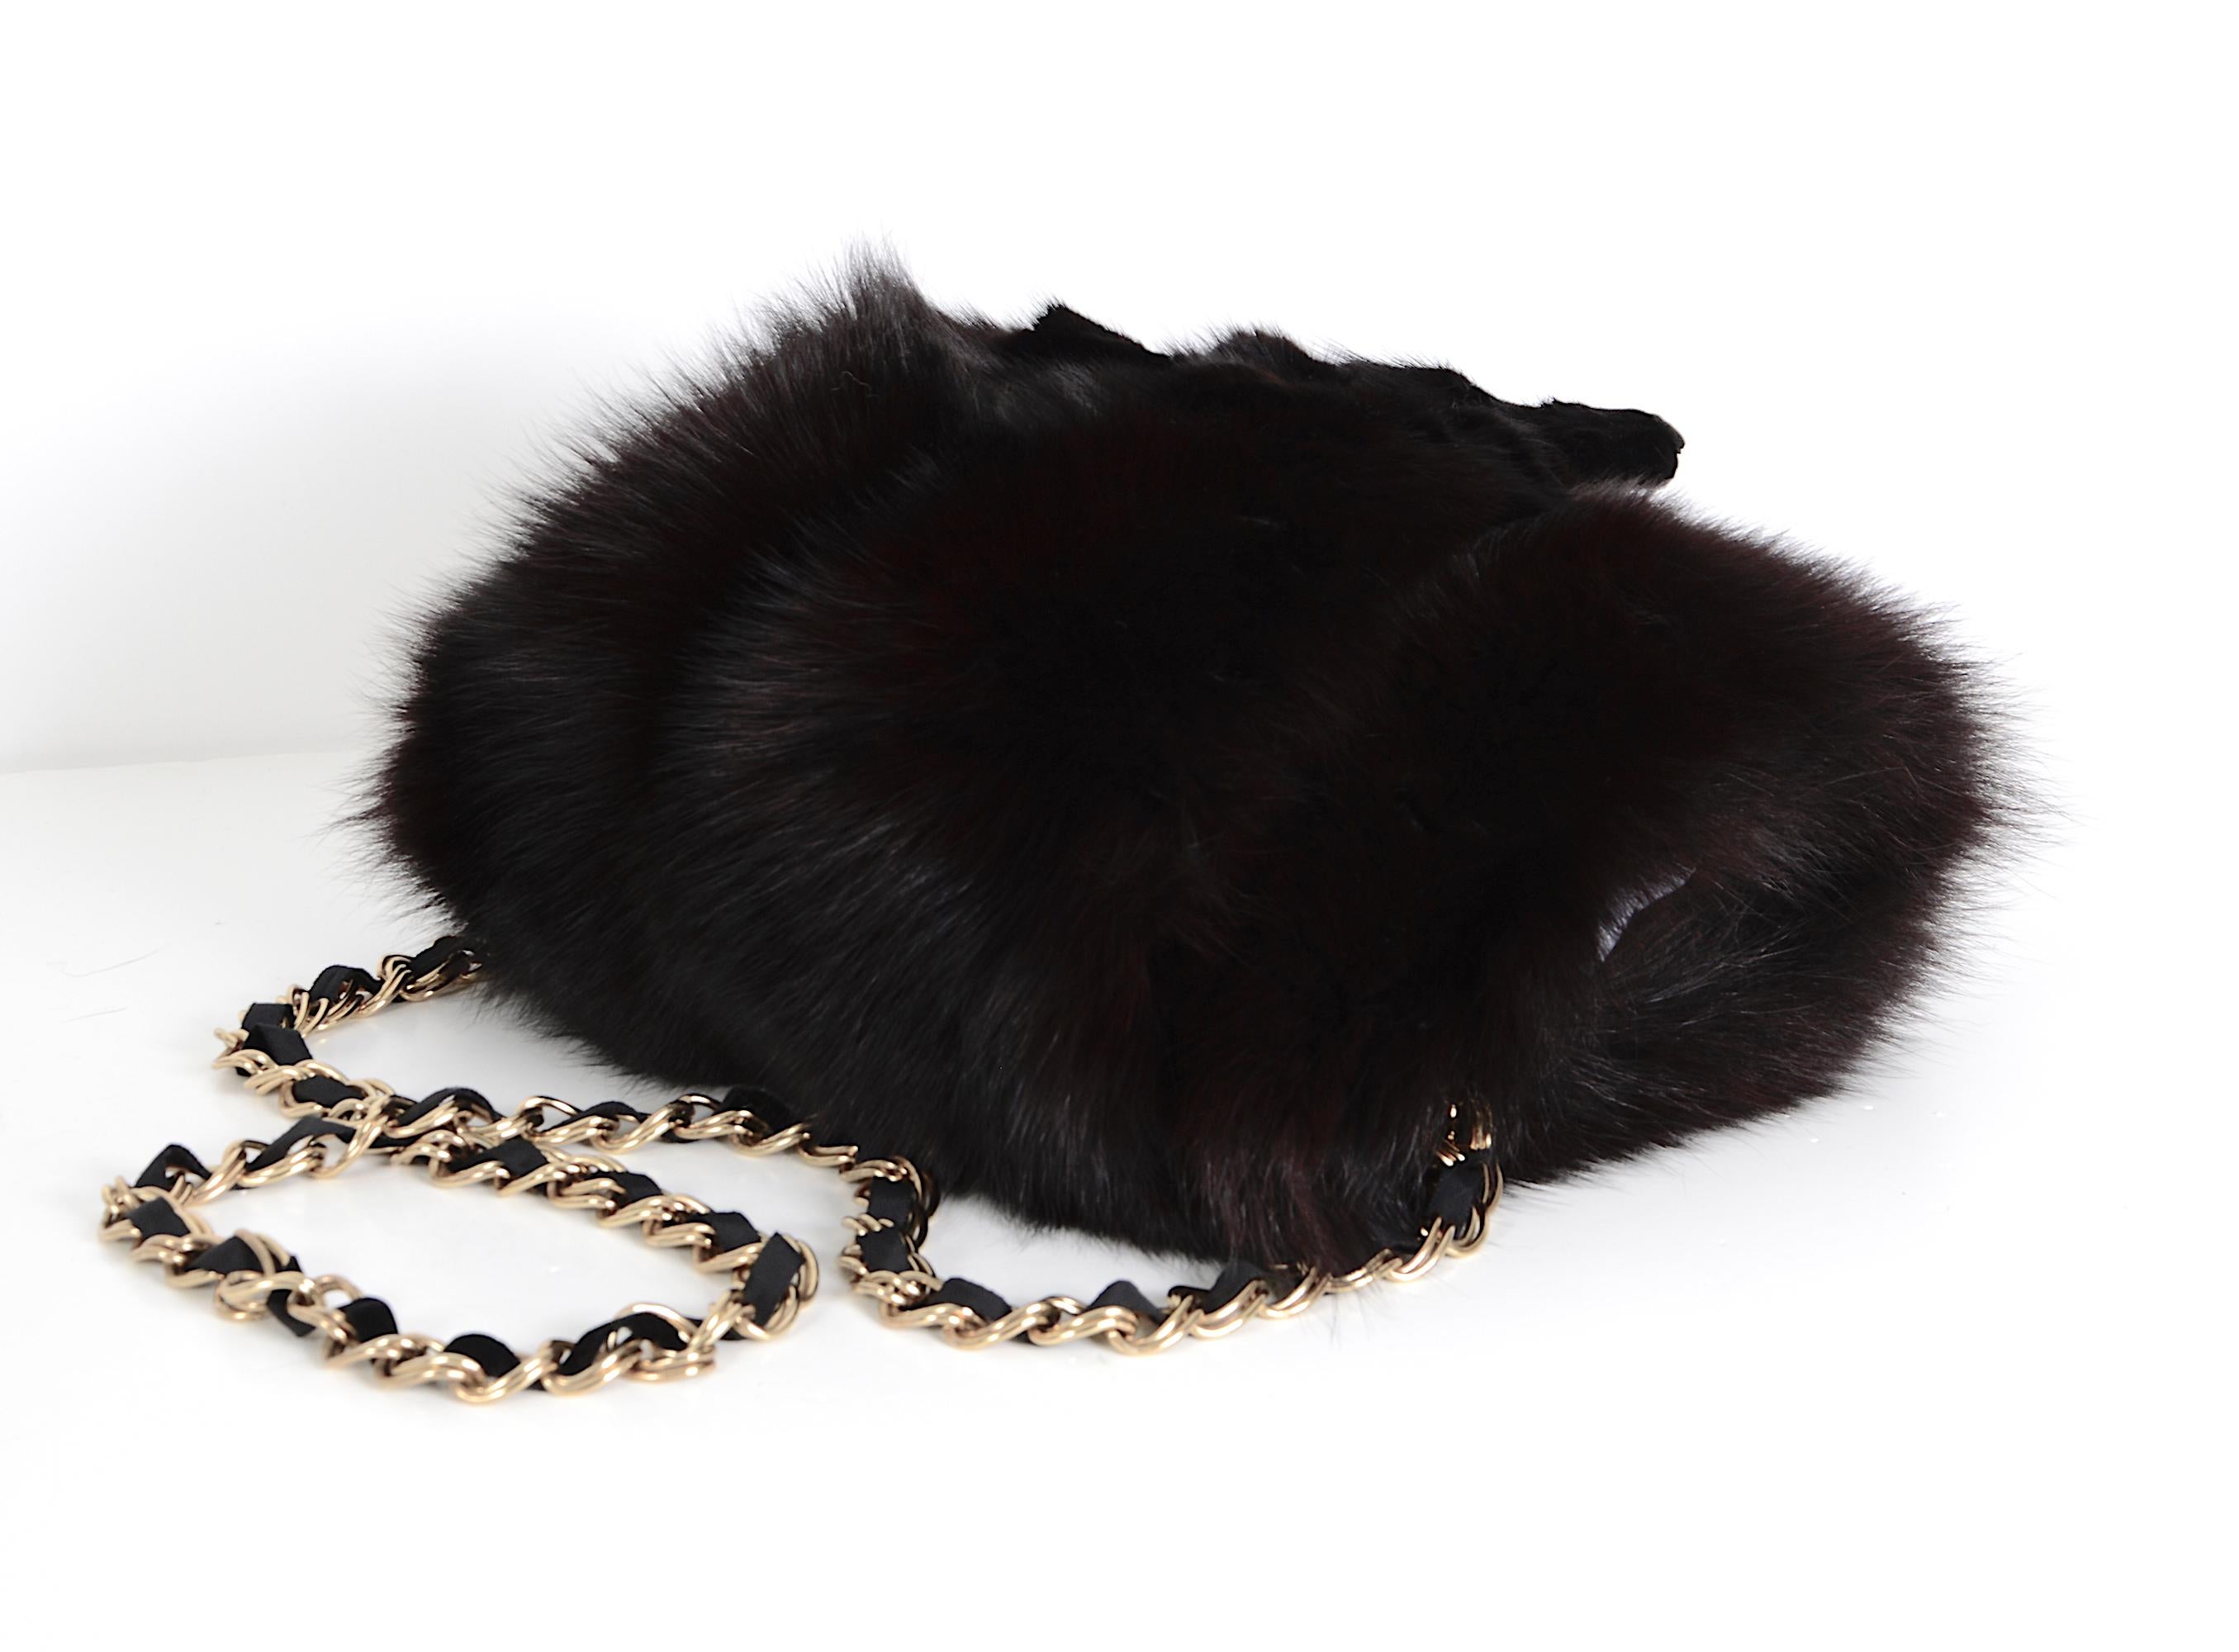 Yves Saint Laurent vintage black fox fur hand warmer muff bag with removable attached heavy gold-tone chain. I have never come across this spectacular piece before and I'm not sure from when it dates, could be the 70s, 80s, or 90s. Inside this